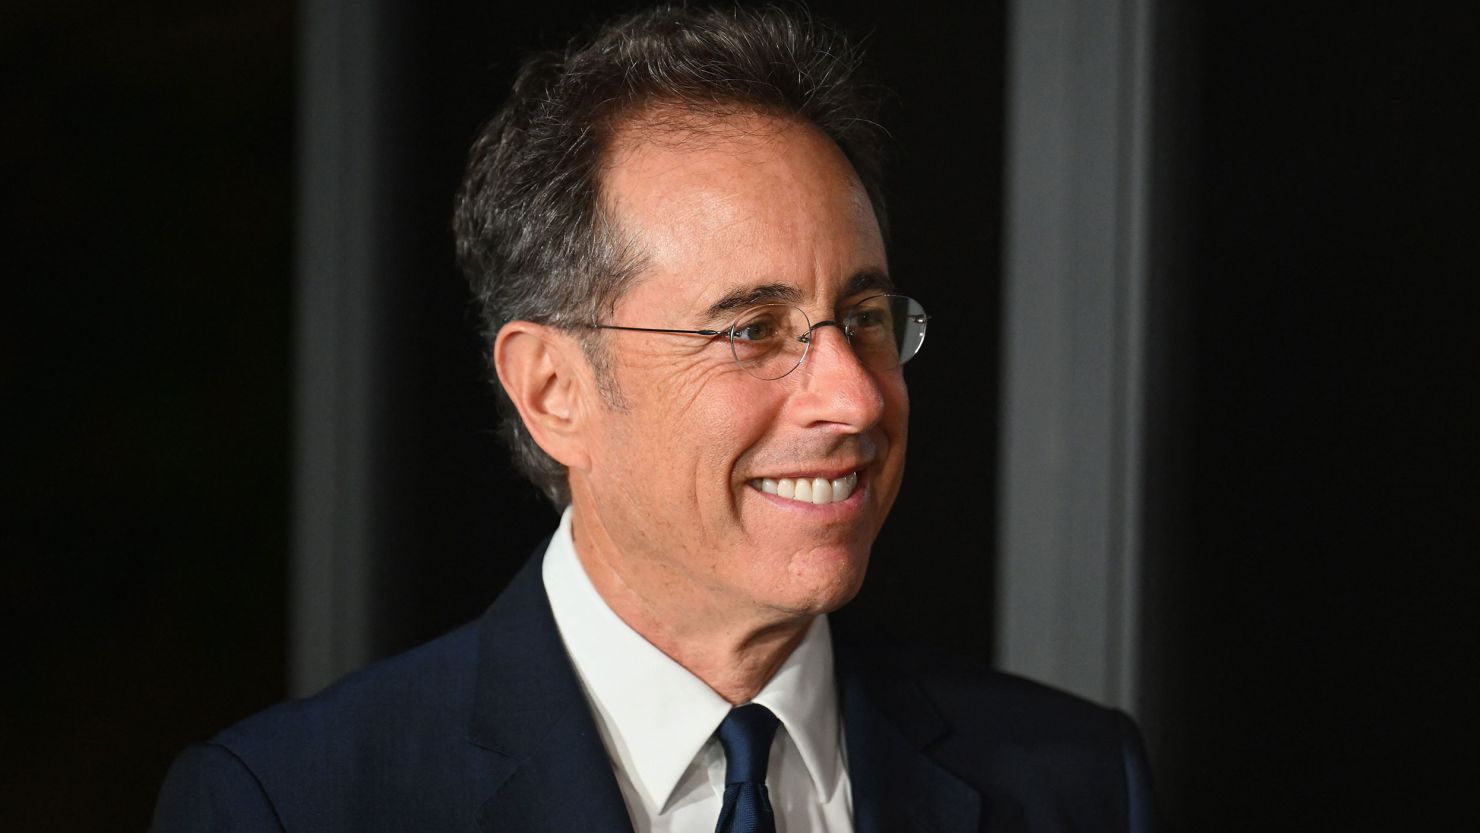 Jerry Seinfeld at the Wall Street Journal Magazine 2022 Innovator awards in New York. 